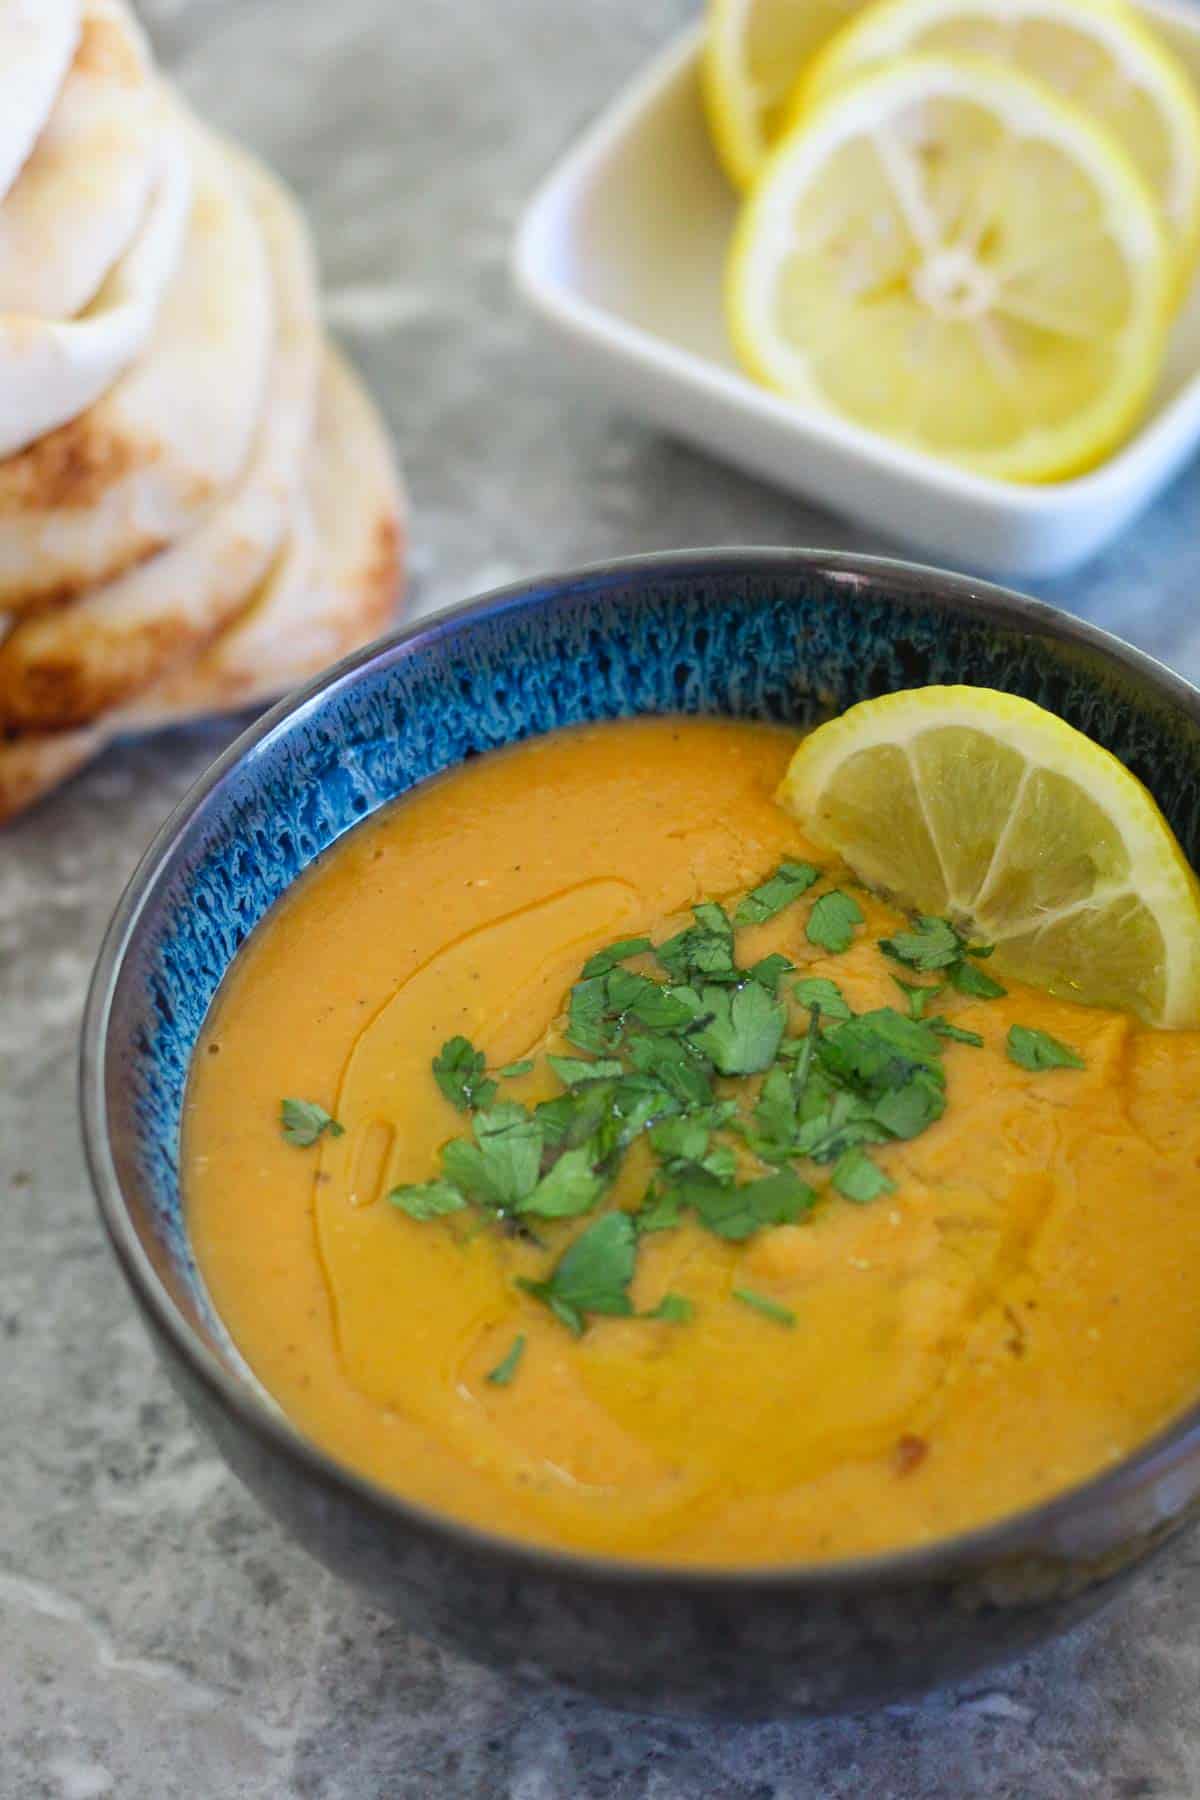 A bowl of Red Lentils Soup with Butternut Squash, garnished with parsley and lemon. In the background you see a stack of pita breads and lemon slices.